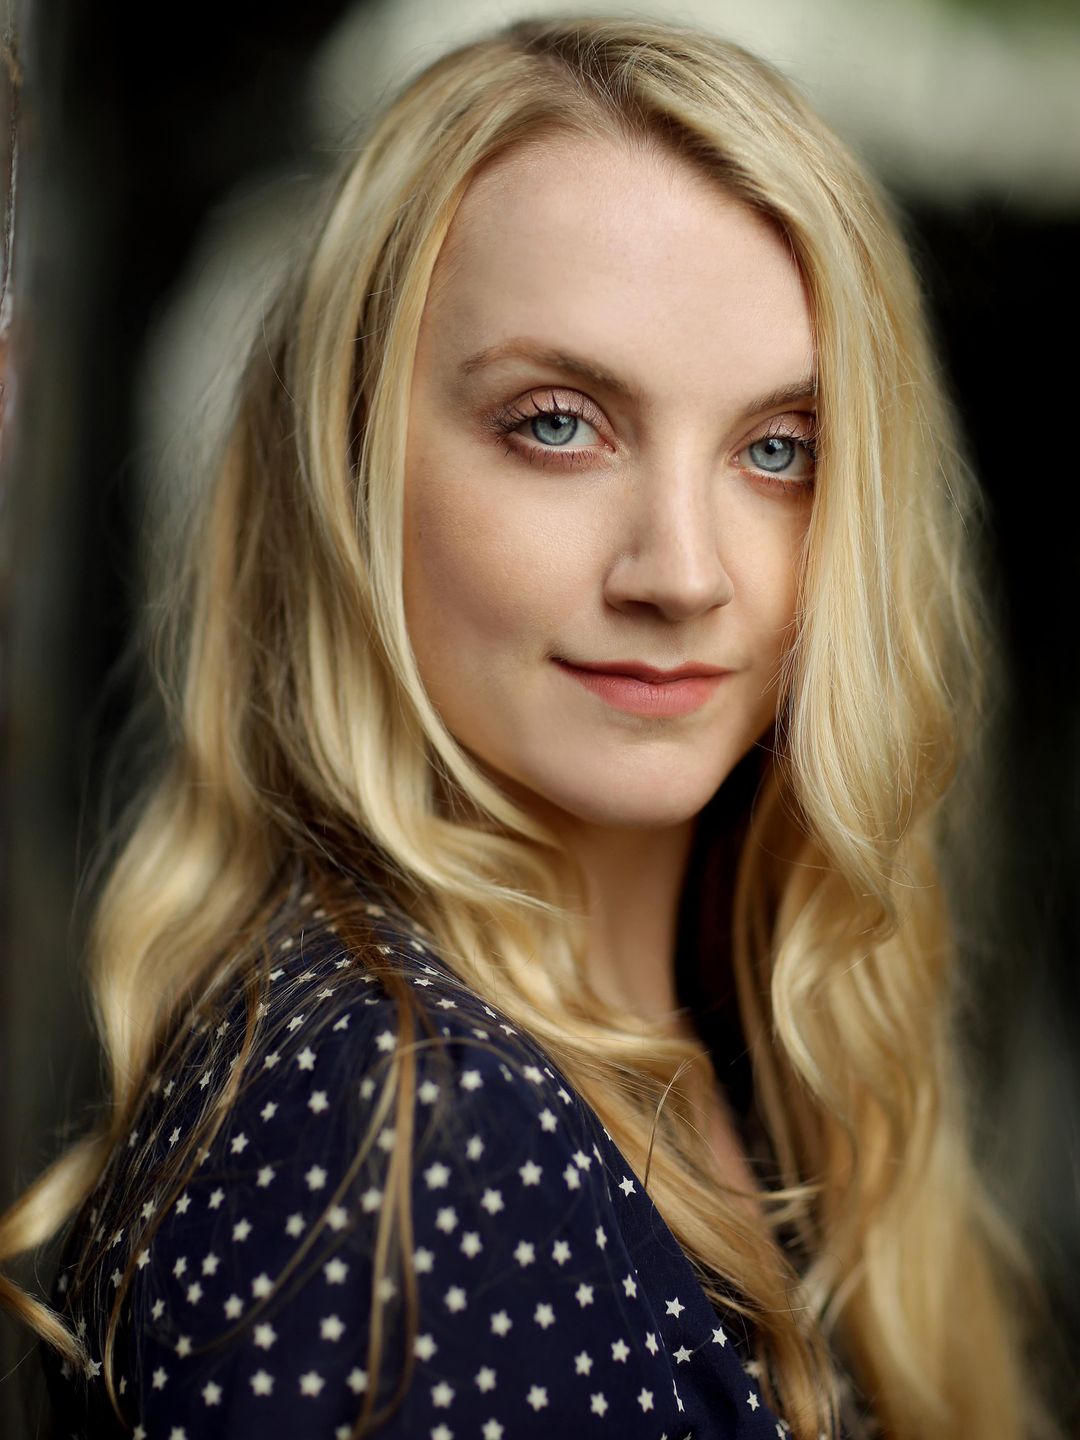 Evanna Lynch who is her mother